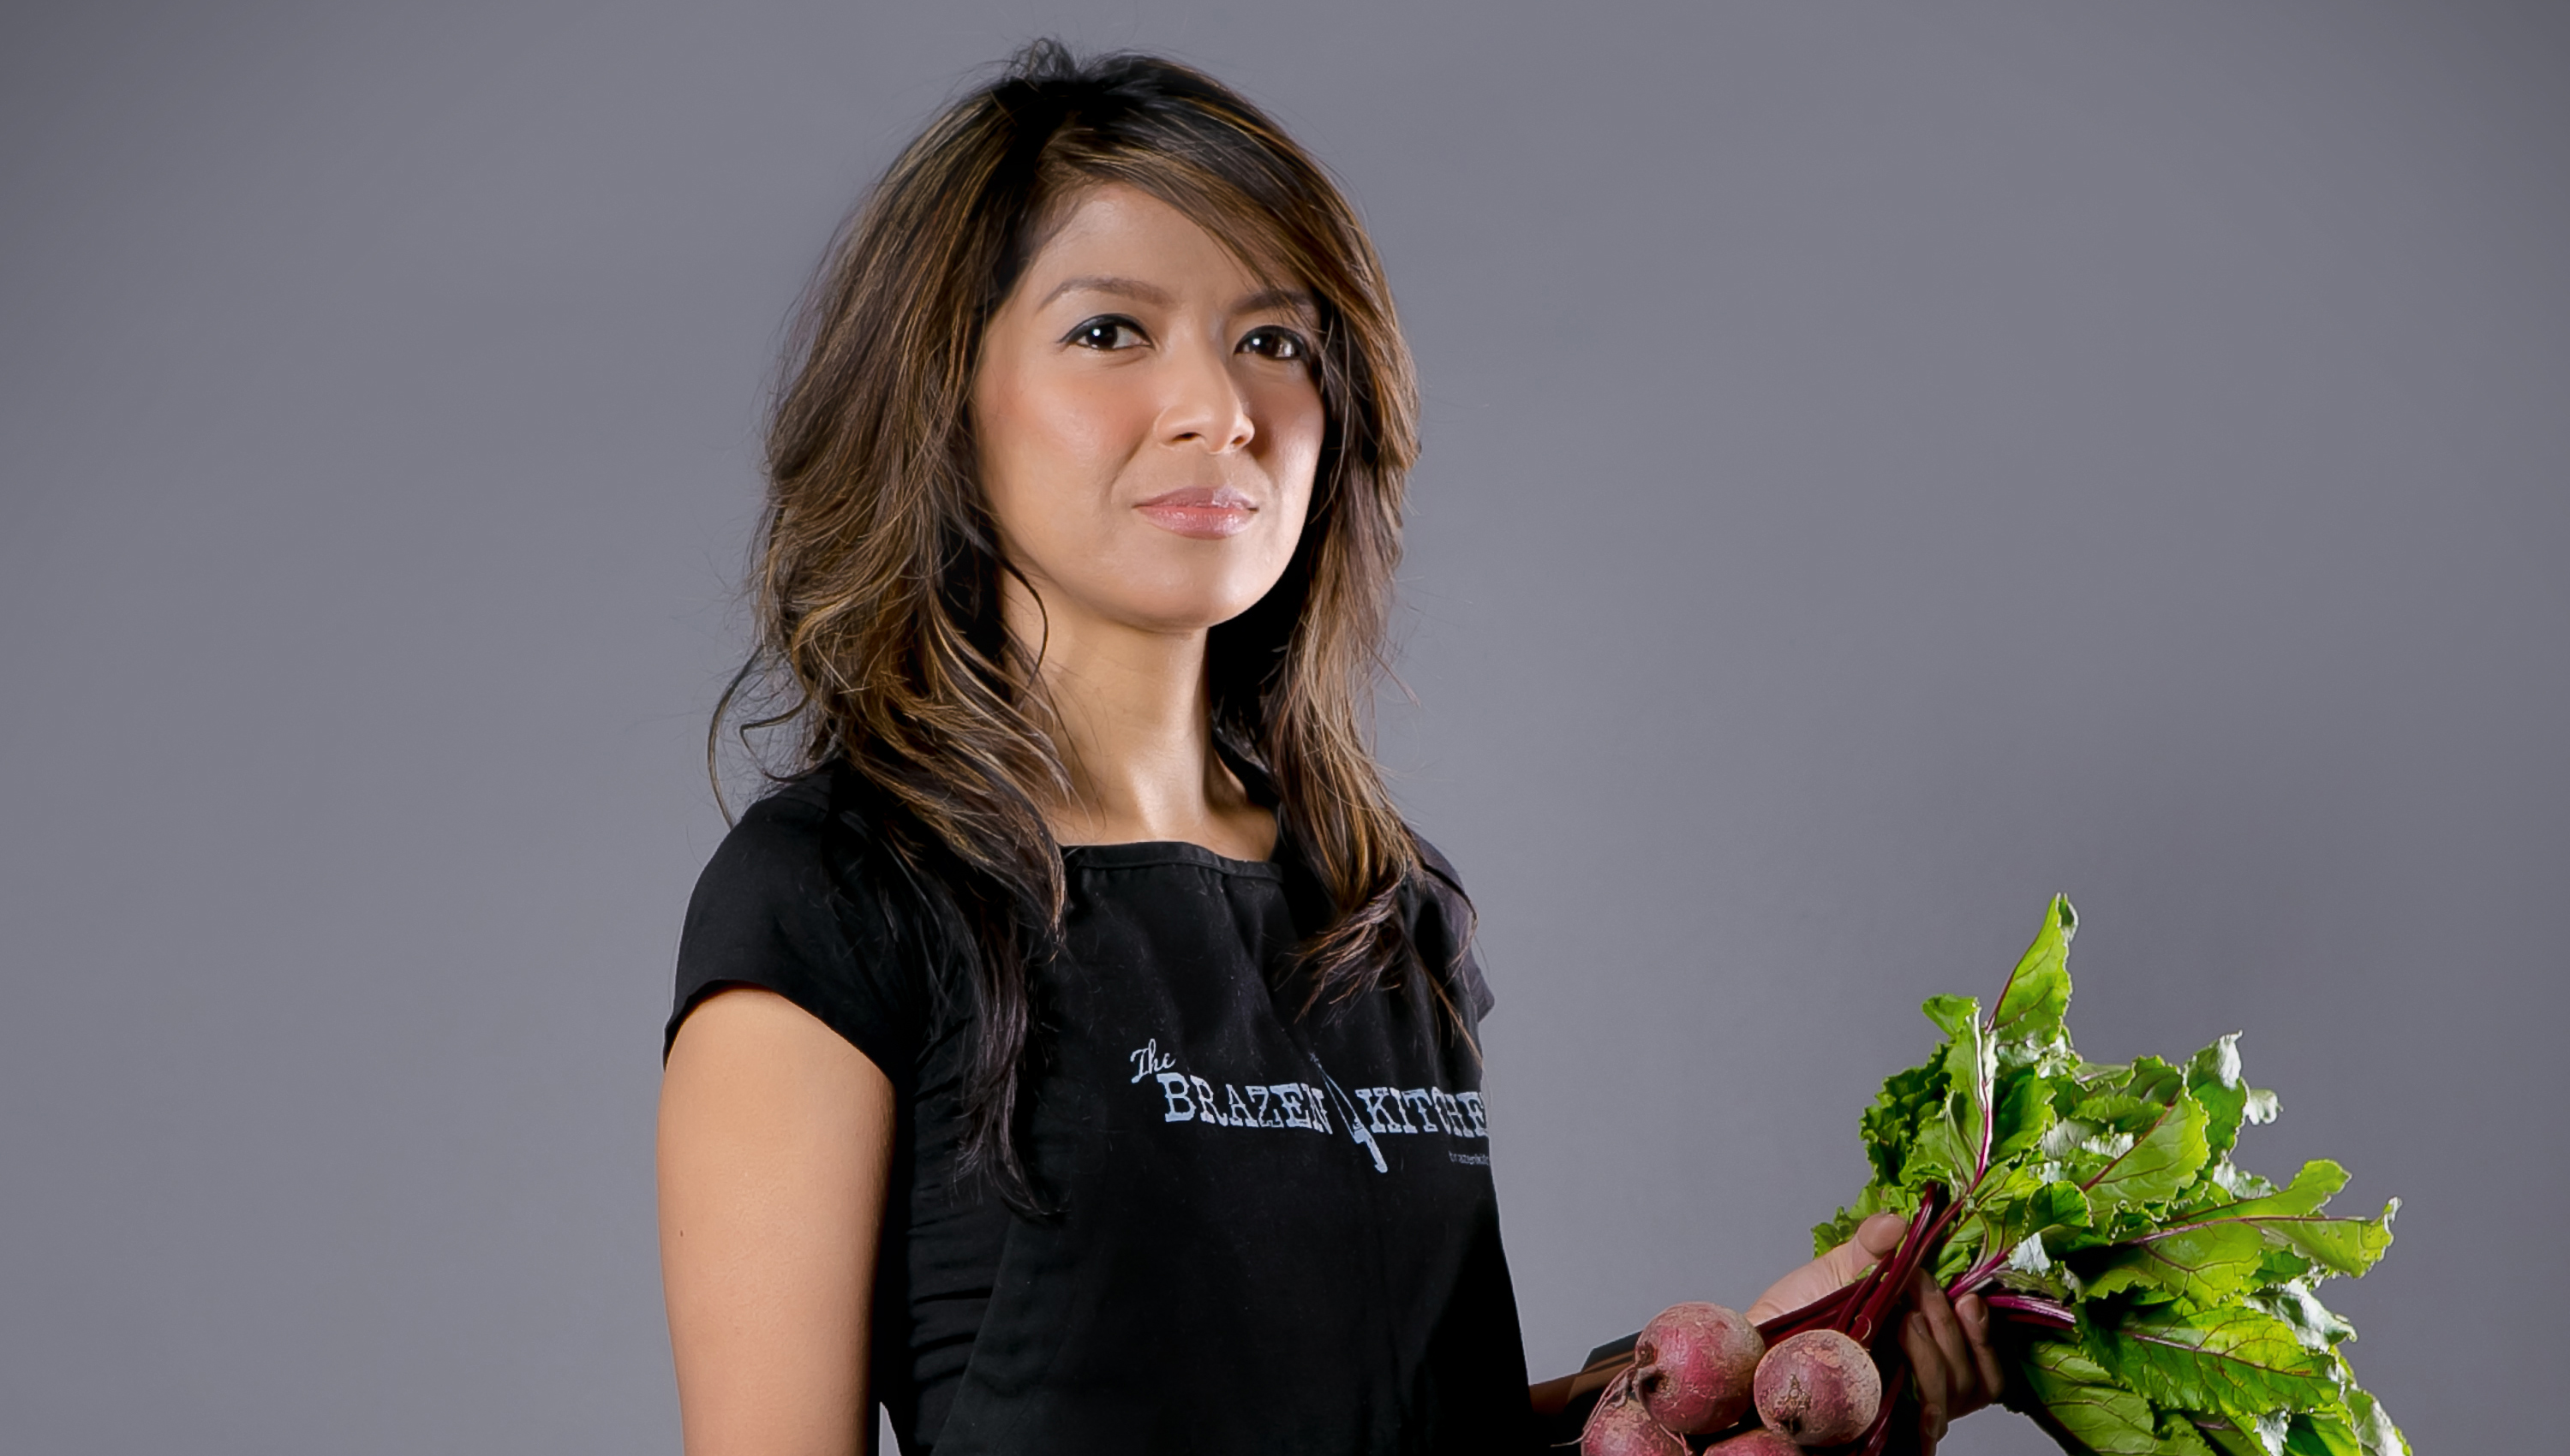 Portrait of Leah Lizarondo, Heinz College alumna and co-founder of the 412 Food Rescue organization